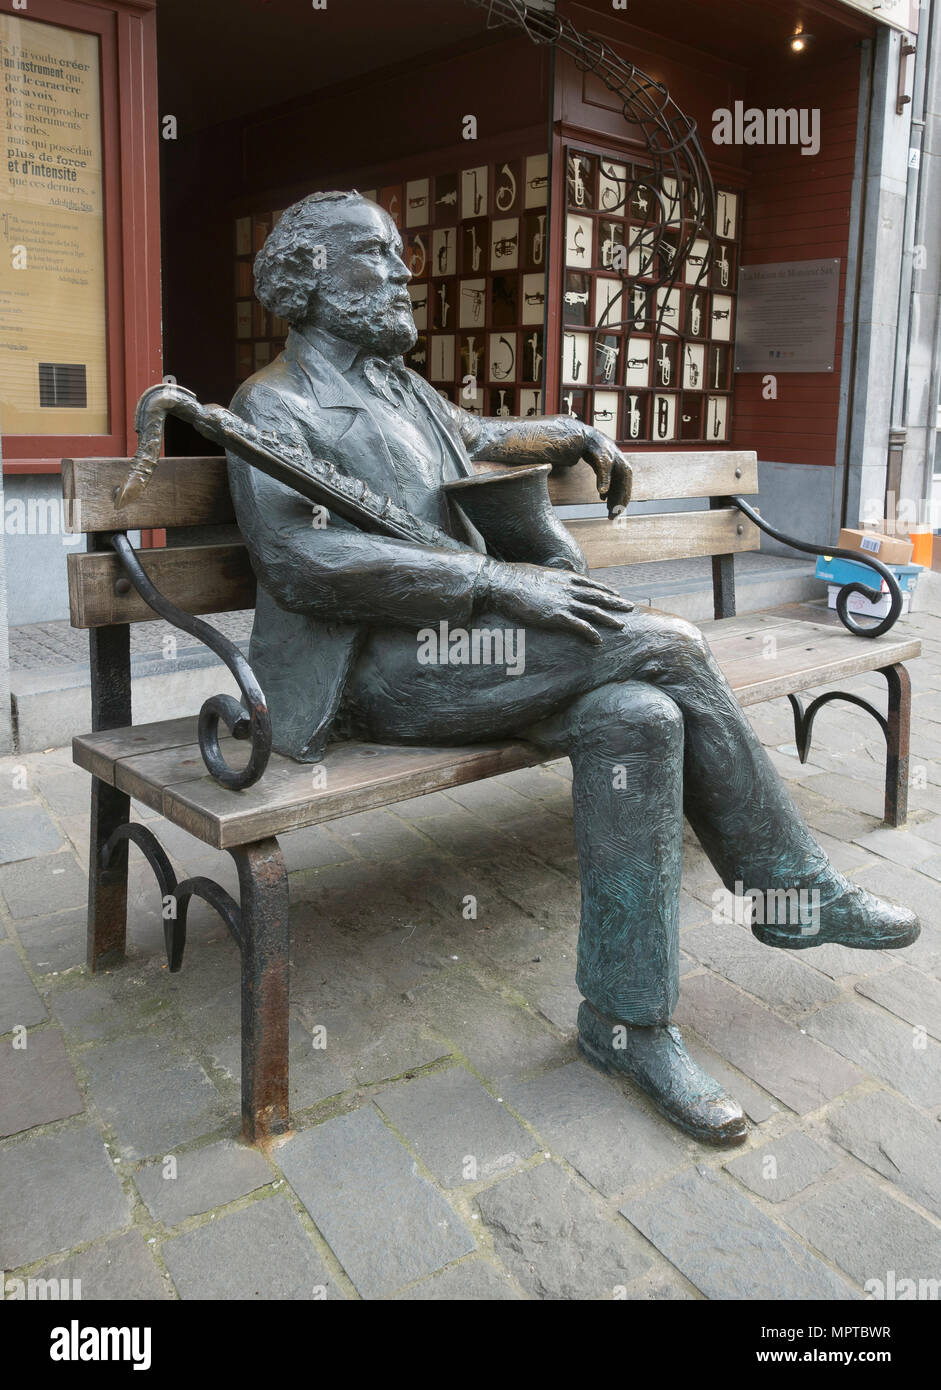 Sculpture by Adolphe Sax, 1814 -1894, at birthplace, musician and inventor of the saxophone, Dinant, Wallonia, Belgium Stock Photo